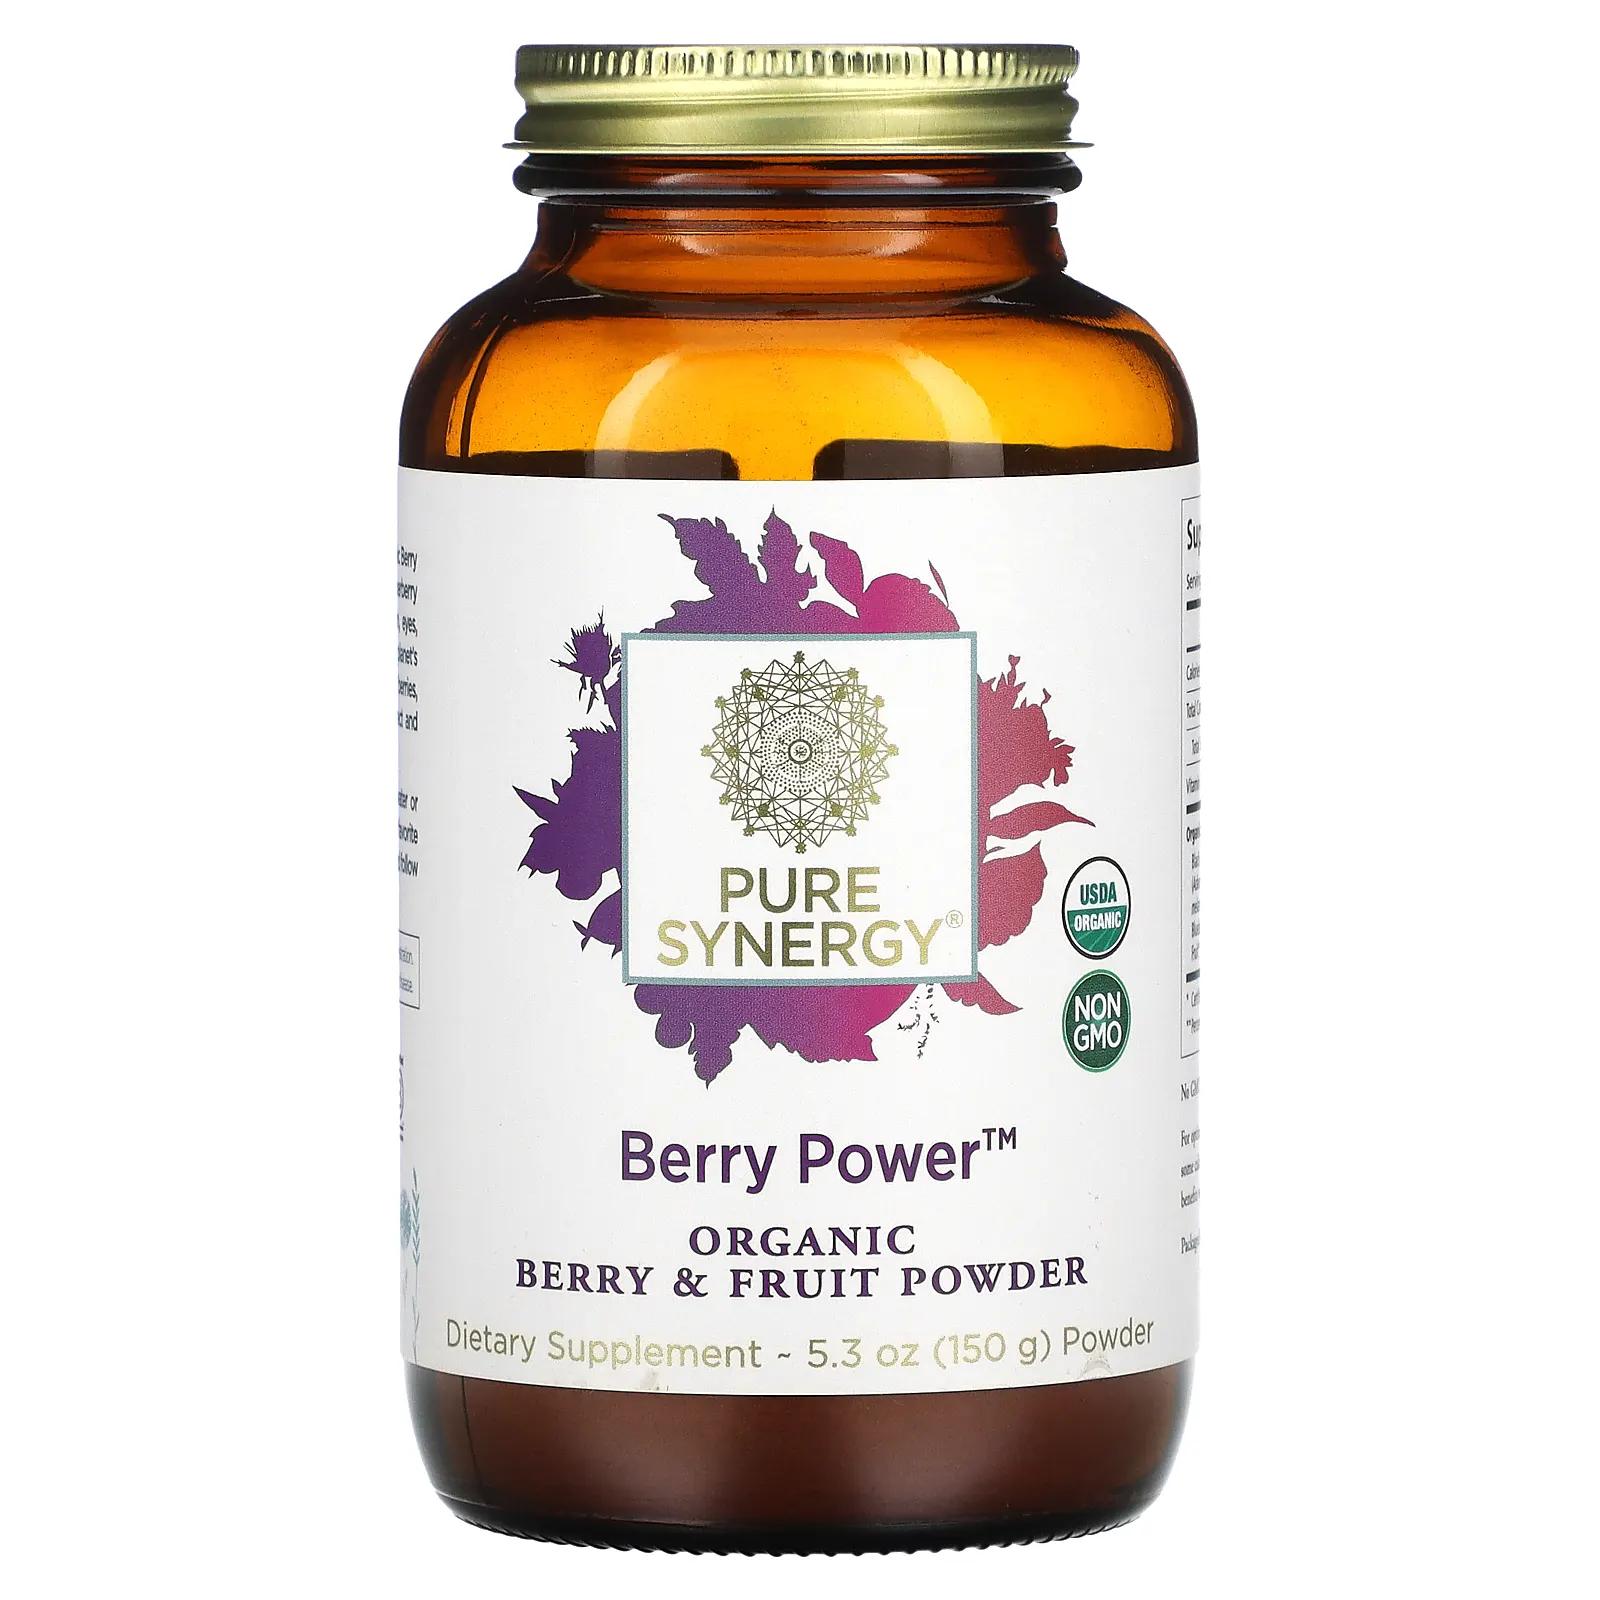 pure synergy berry power organic berry Pure Synergy Berry Power Organic Berry & Fruit Powder 5.3 oz (150 g)